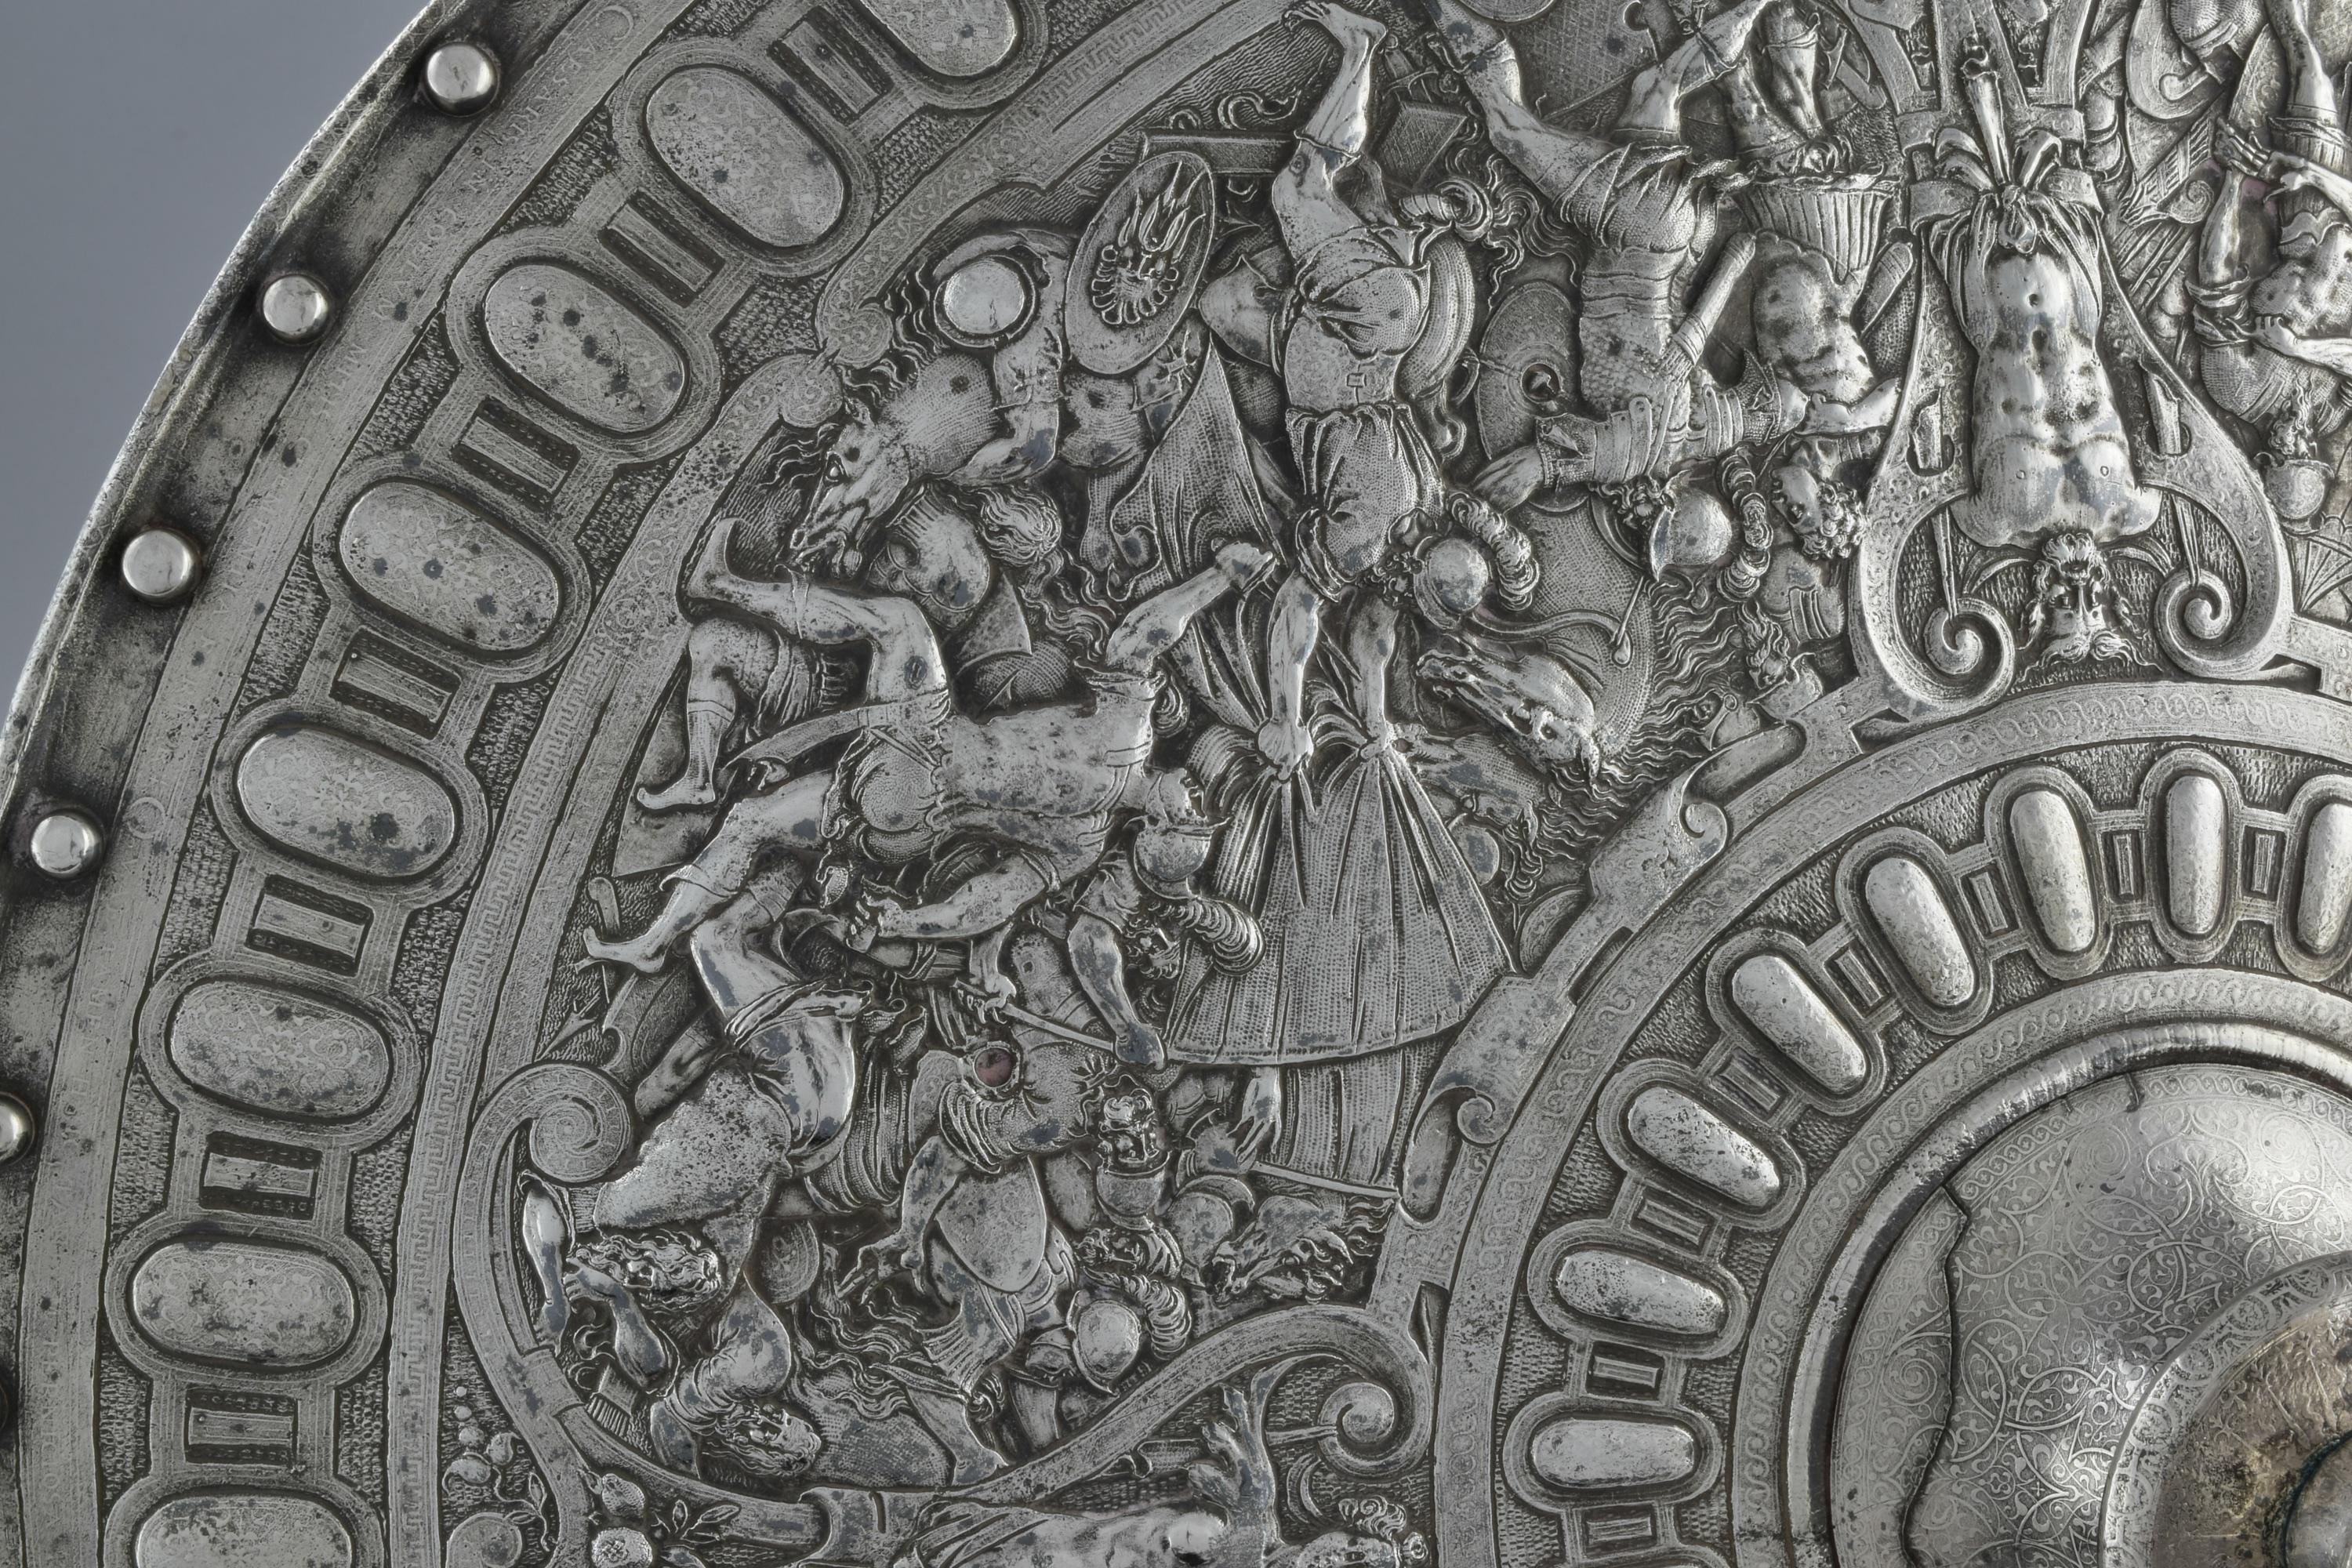 A circular shield depicting classical battle scenes. Another similar example can be found in the Metropolitan Museum of Art Accession Number: 07.102.7.

Biography:

Elkington & Co, founded in 1815, is the pioneer, and inventor of the electroplating